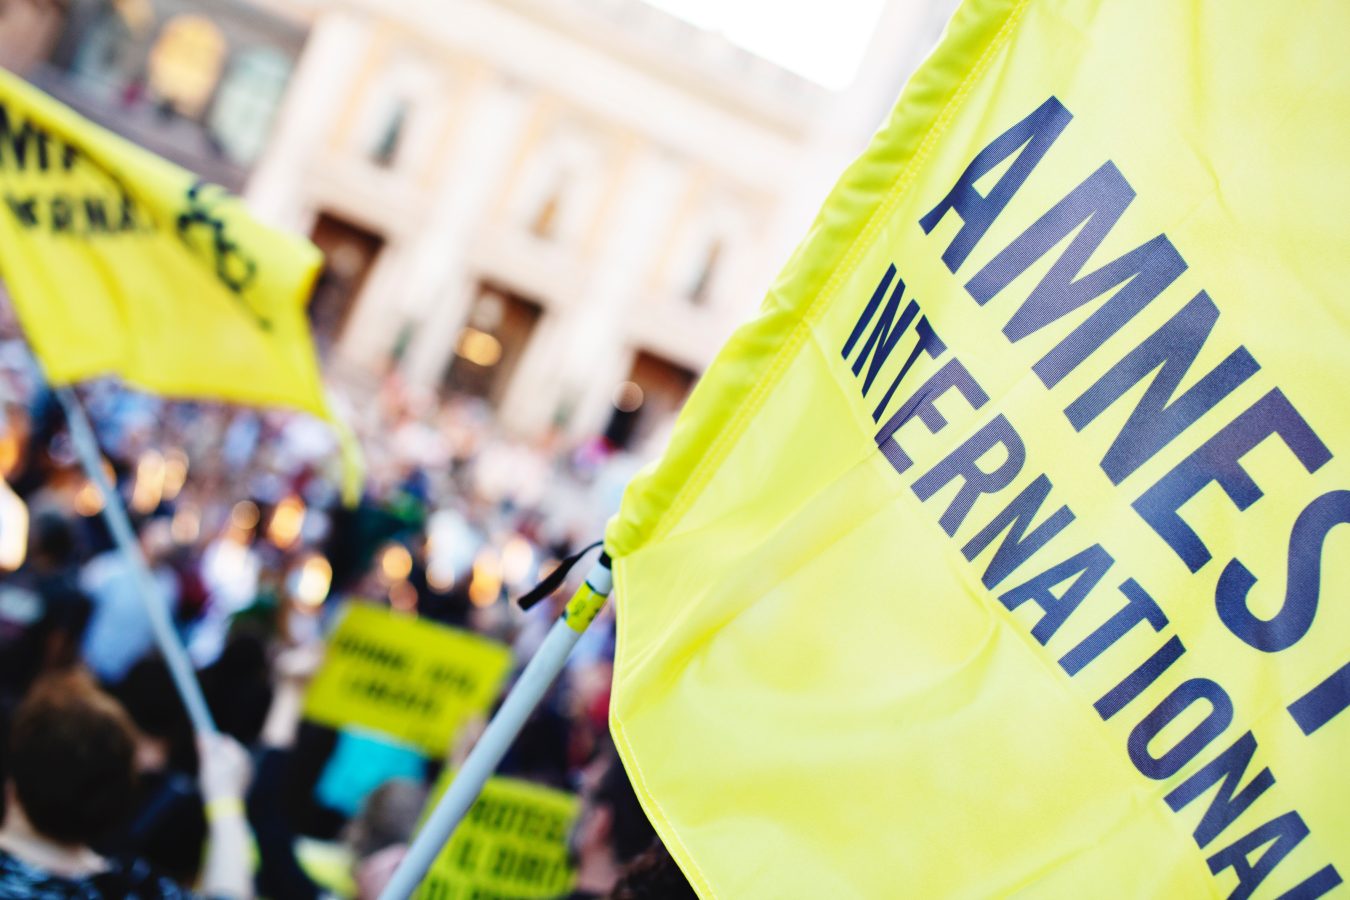 A close up of the Amnesty International flag someone is waving as part of a protest.